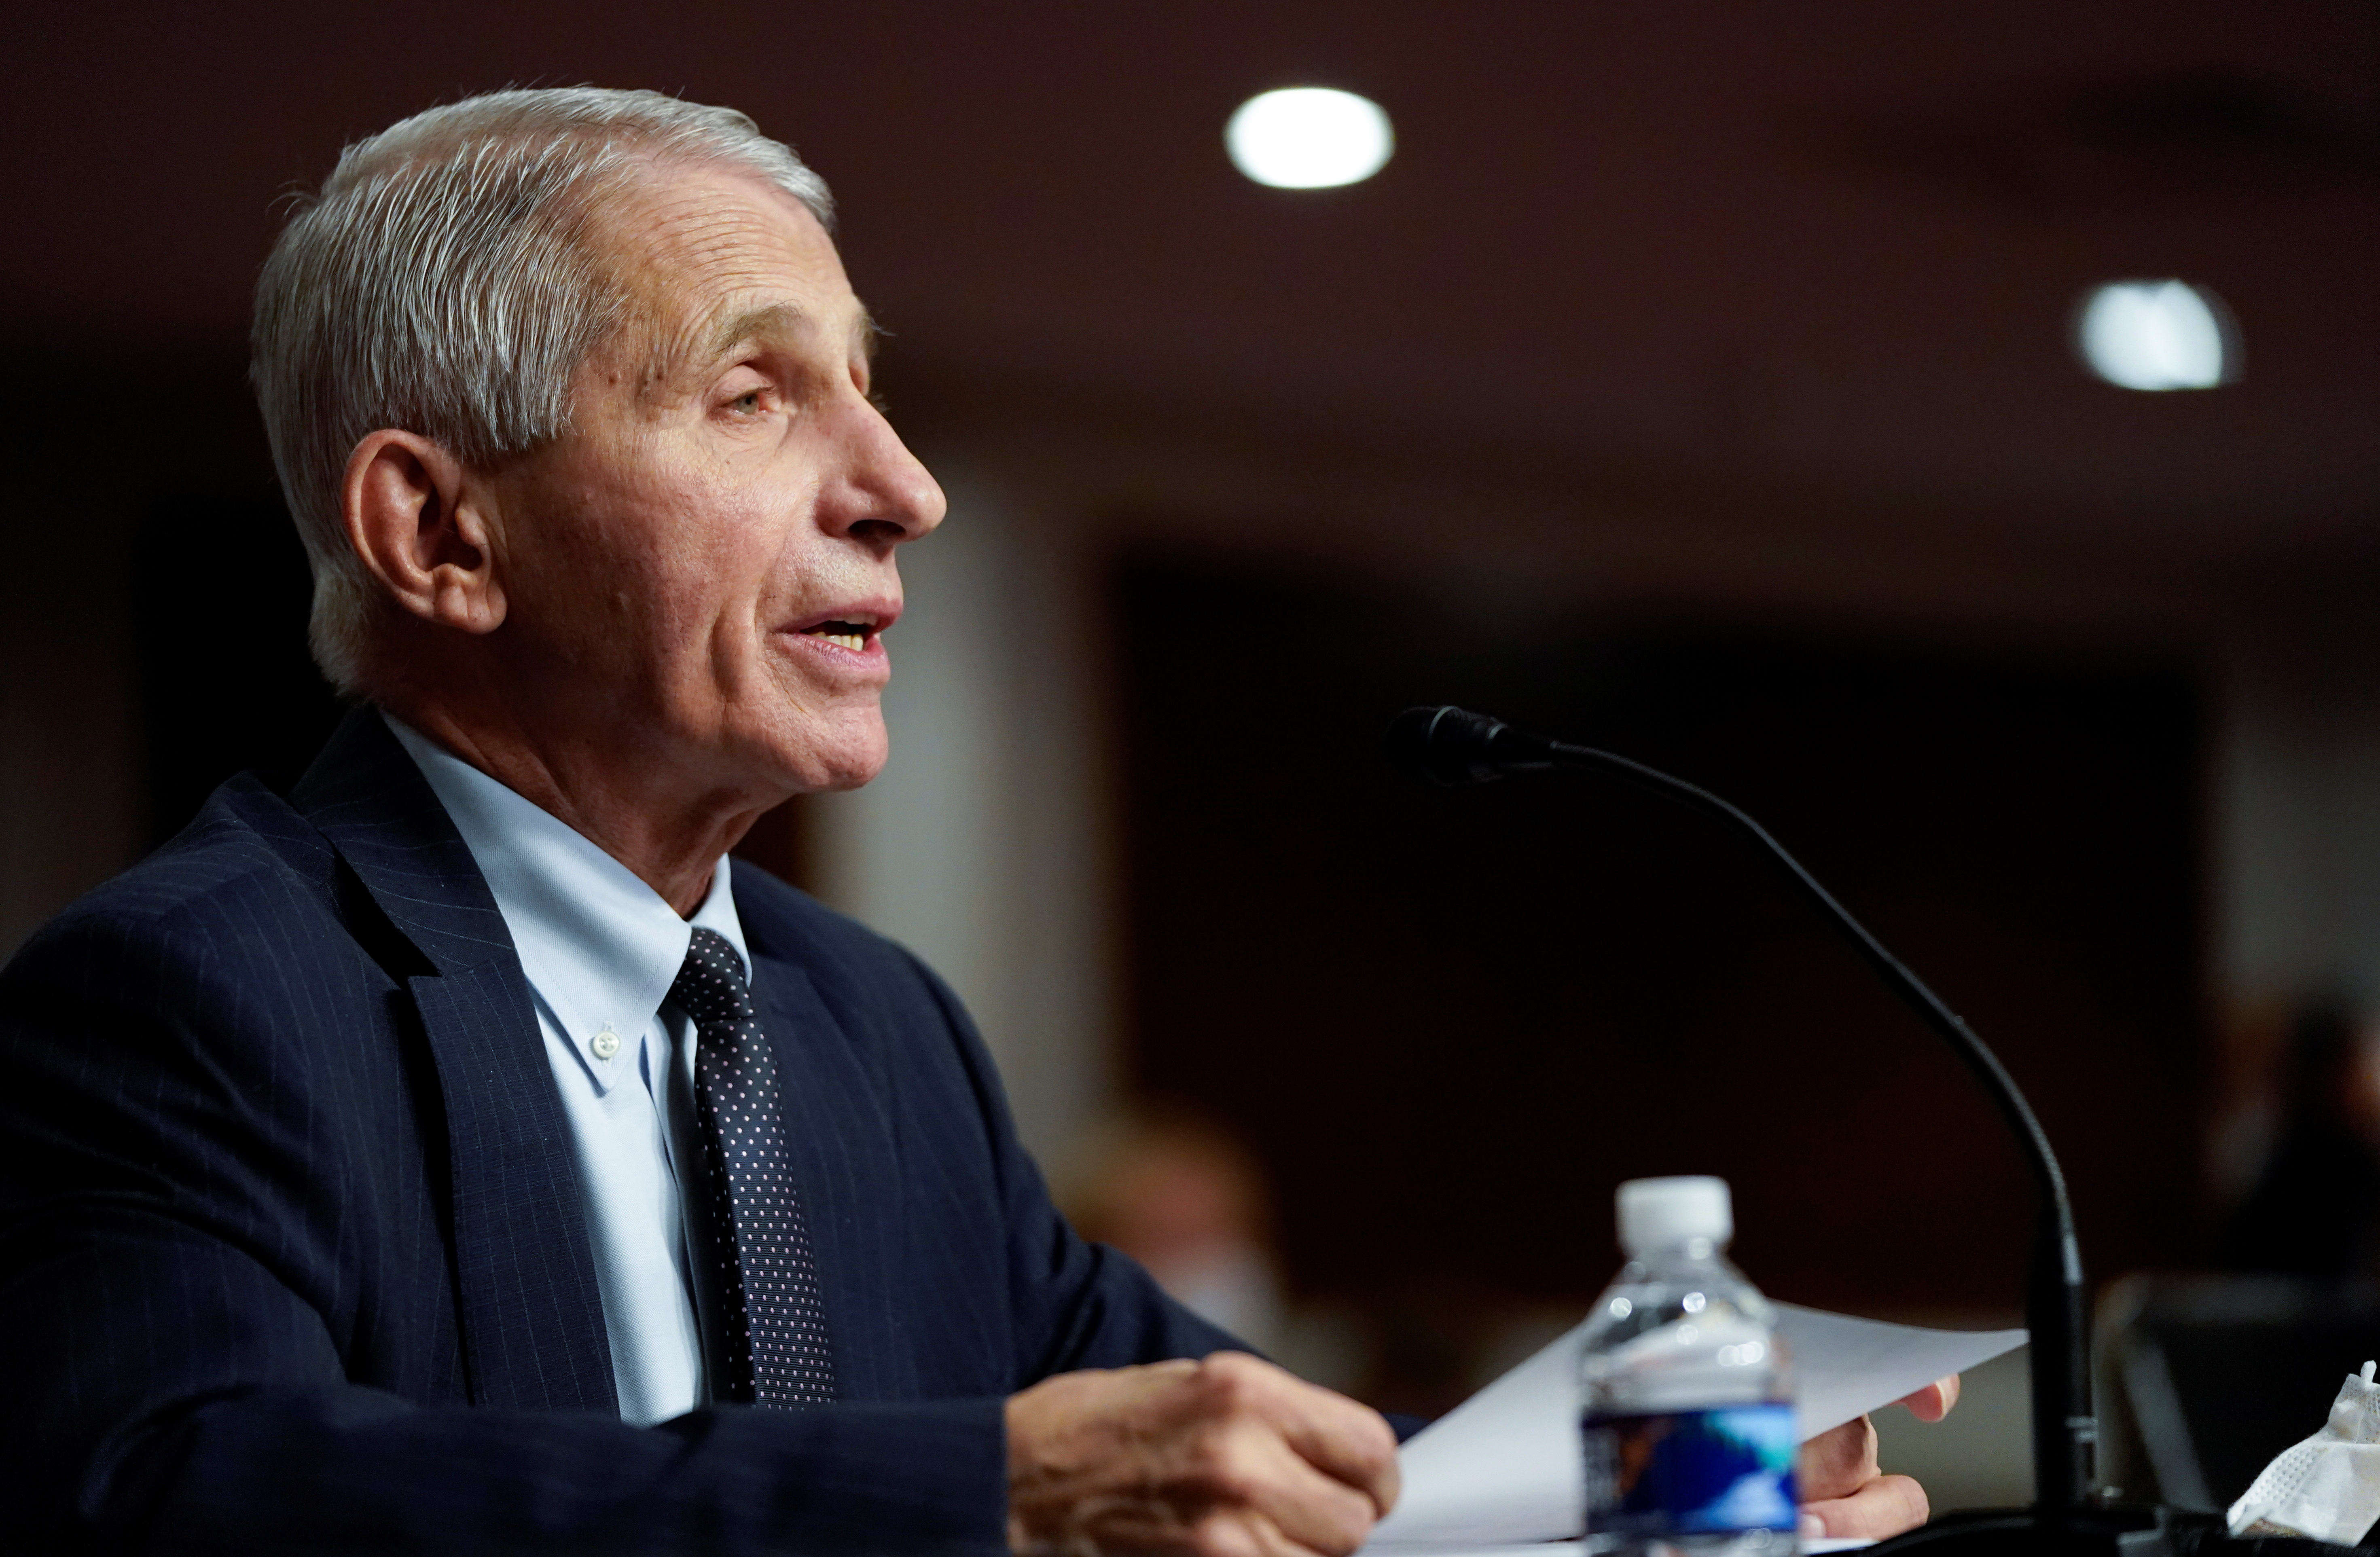 White House Chief Medical Adviser Anthony Fauci gives his opening statement before the Senate Health, Education, Labor and Pensions hearing on 